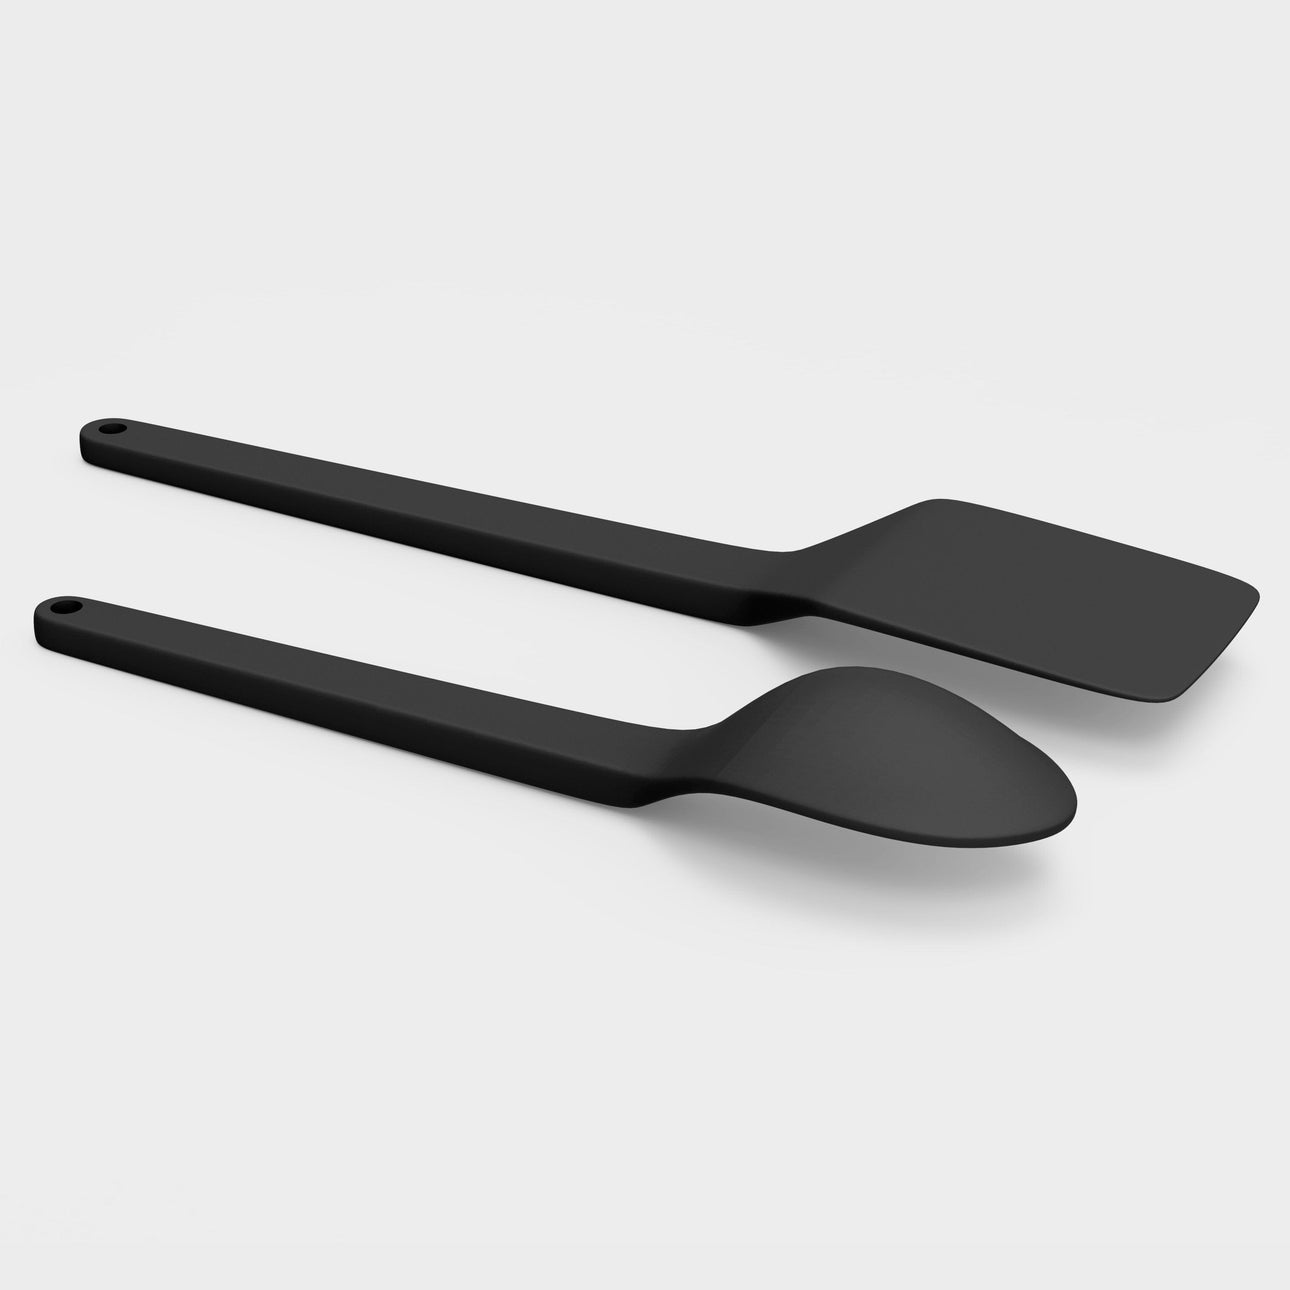 Cantilever Cooking Utensils Spatula and Spoon